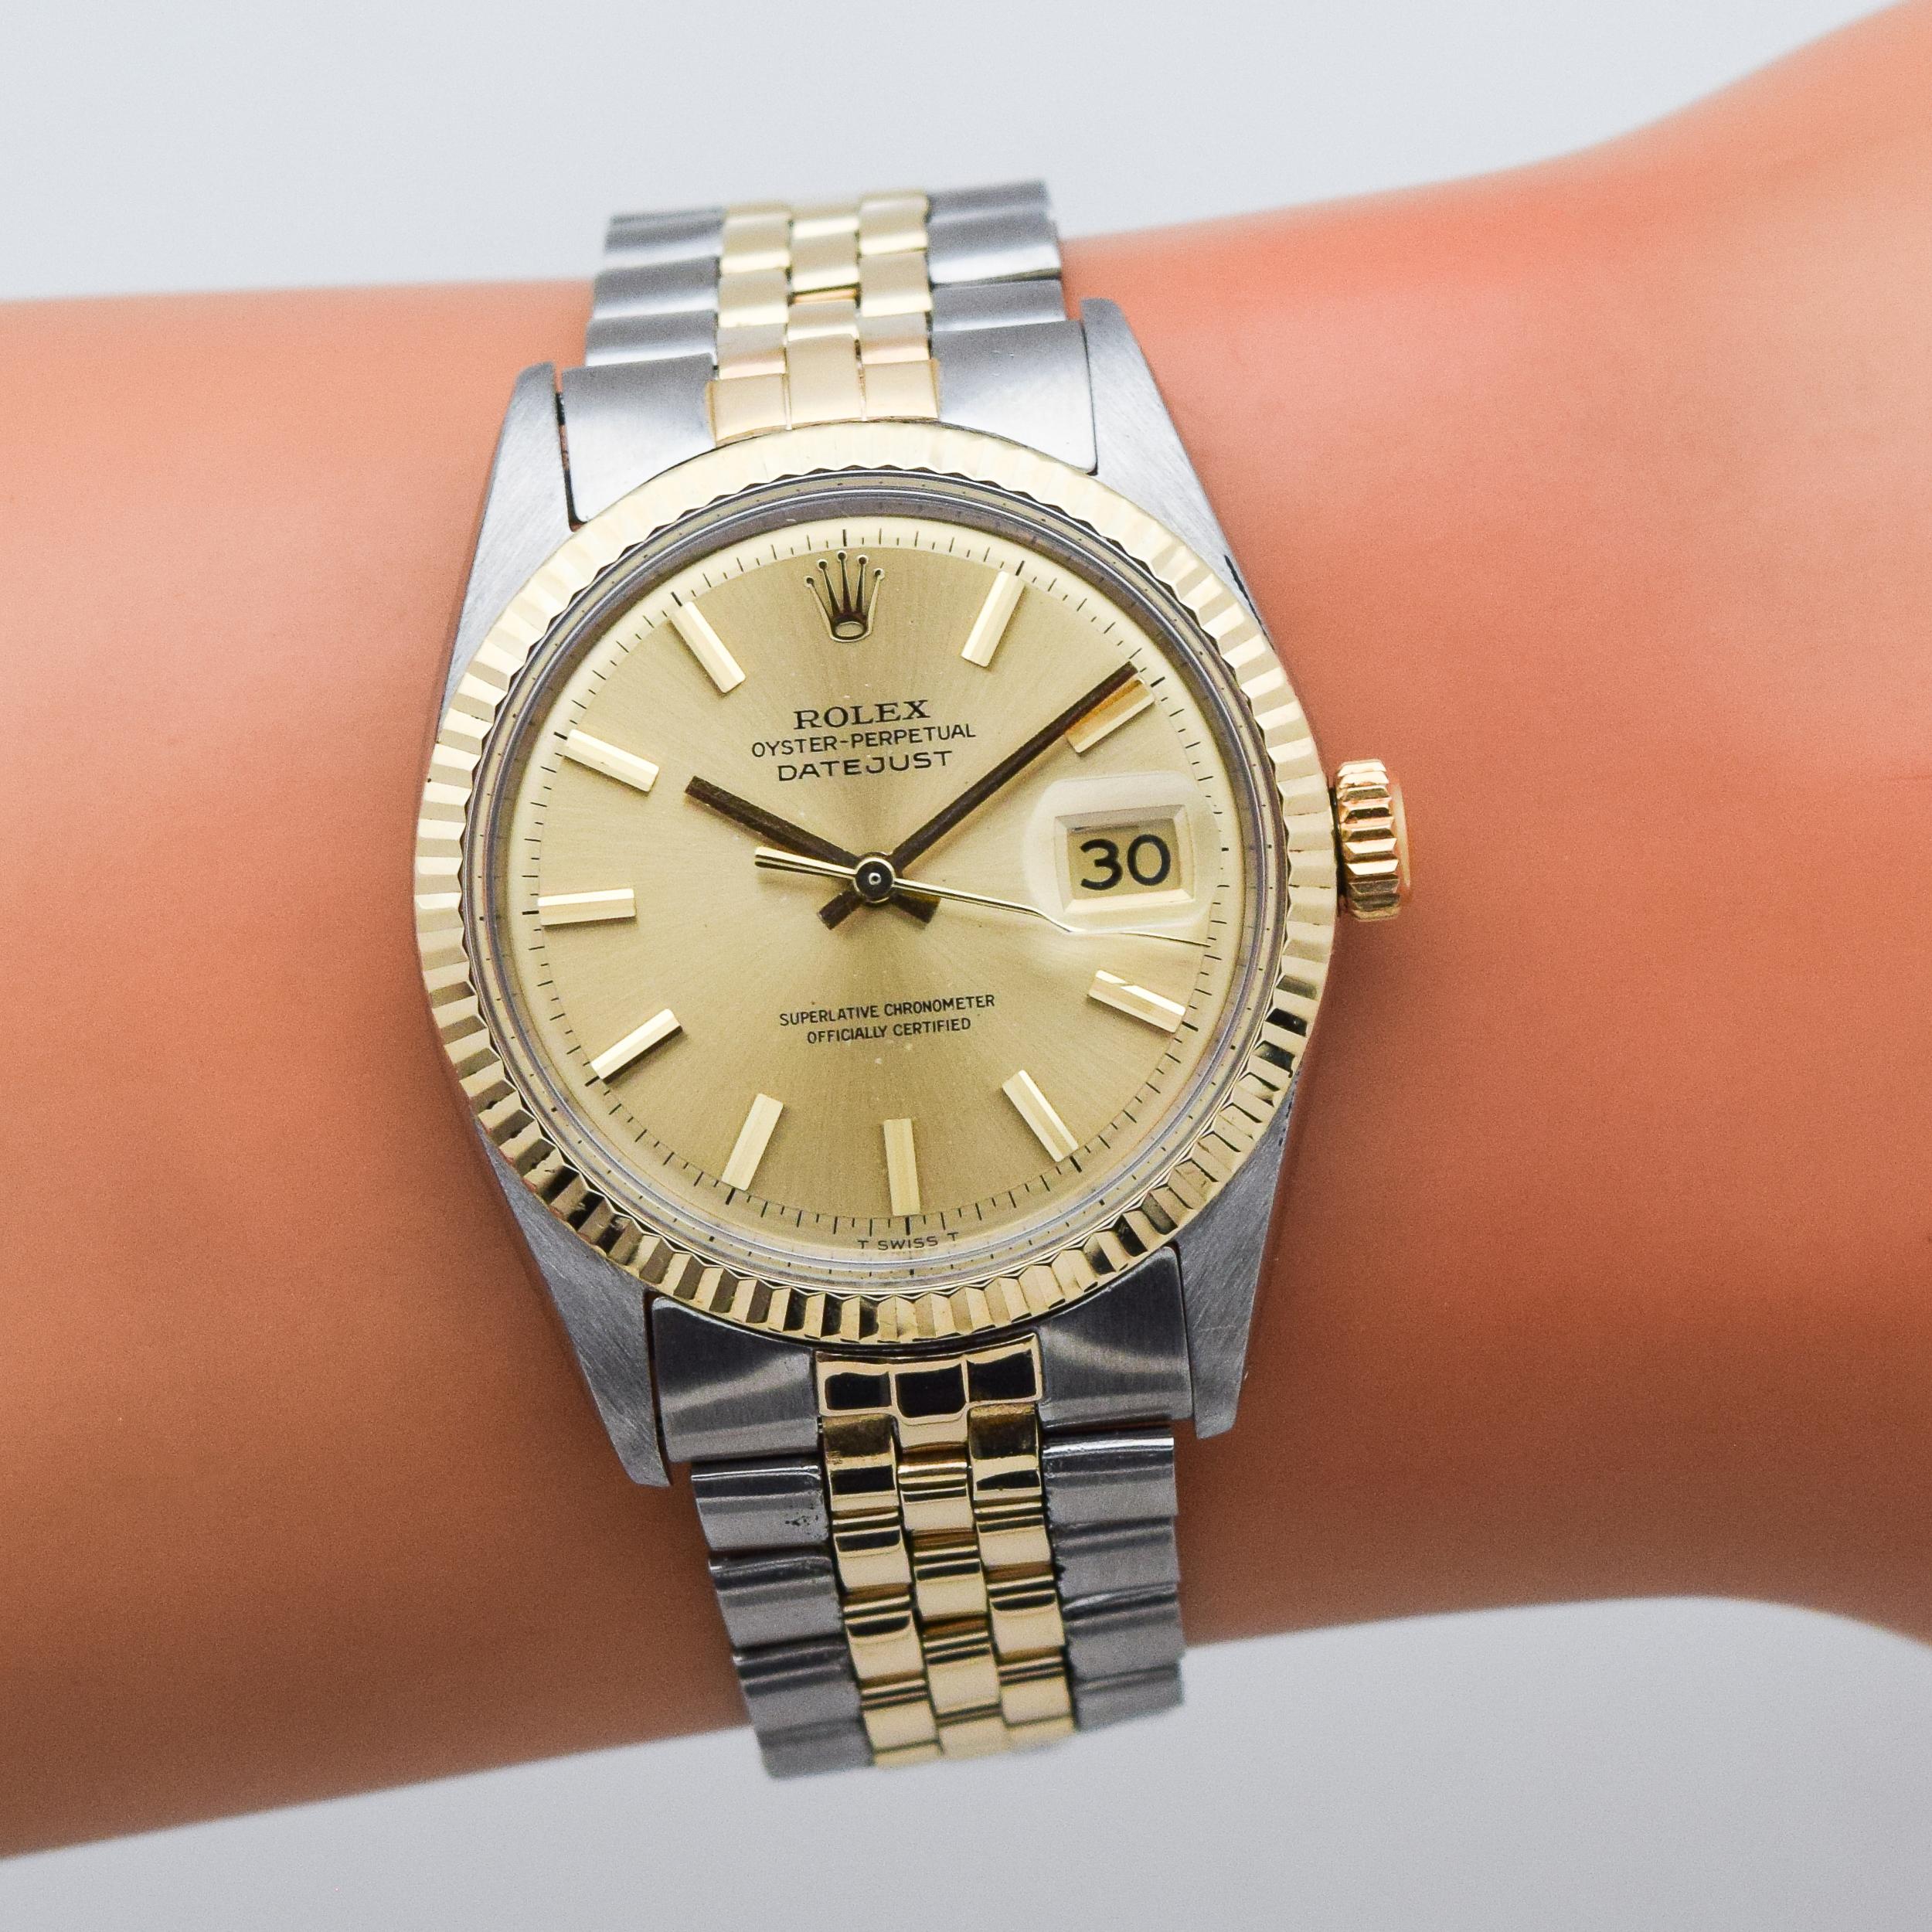 Vintage Rolex Datejust Reference 1601 Two-Tone Watch, 1967 3